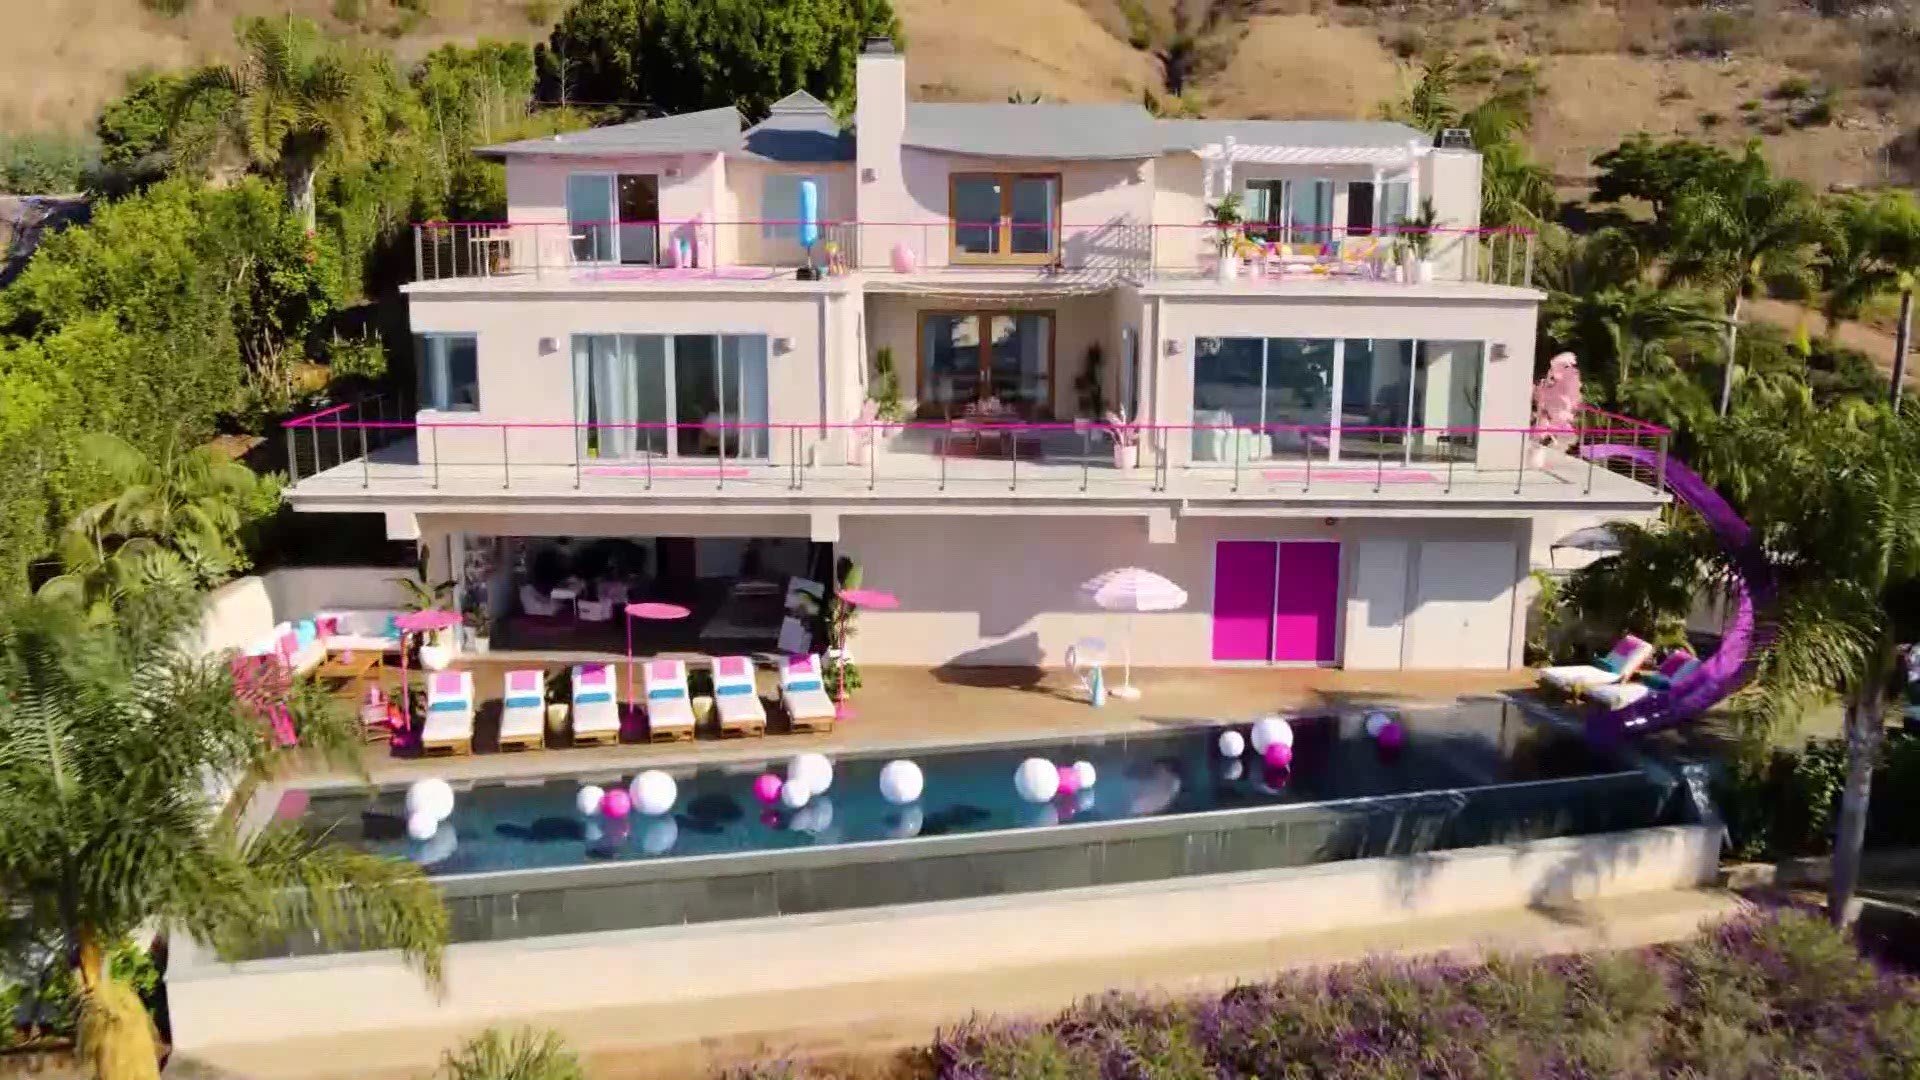 To celebrate the 60th anniversary of iconic doll, Mattel has transformed a breathtaking ocean-view Malibu home into a Barbie-lovers dream.